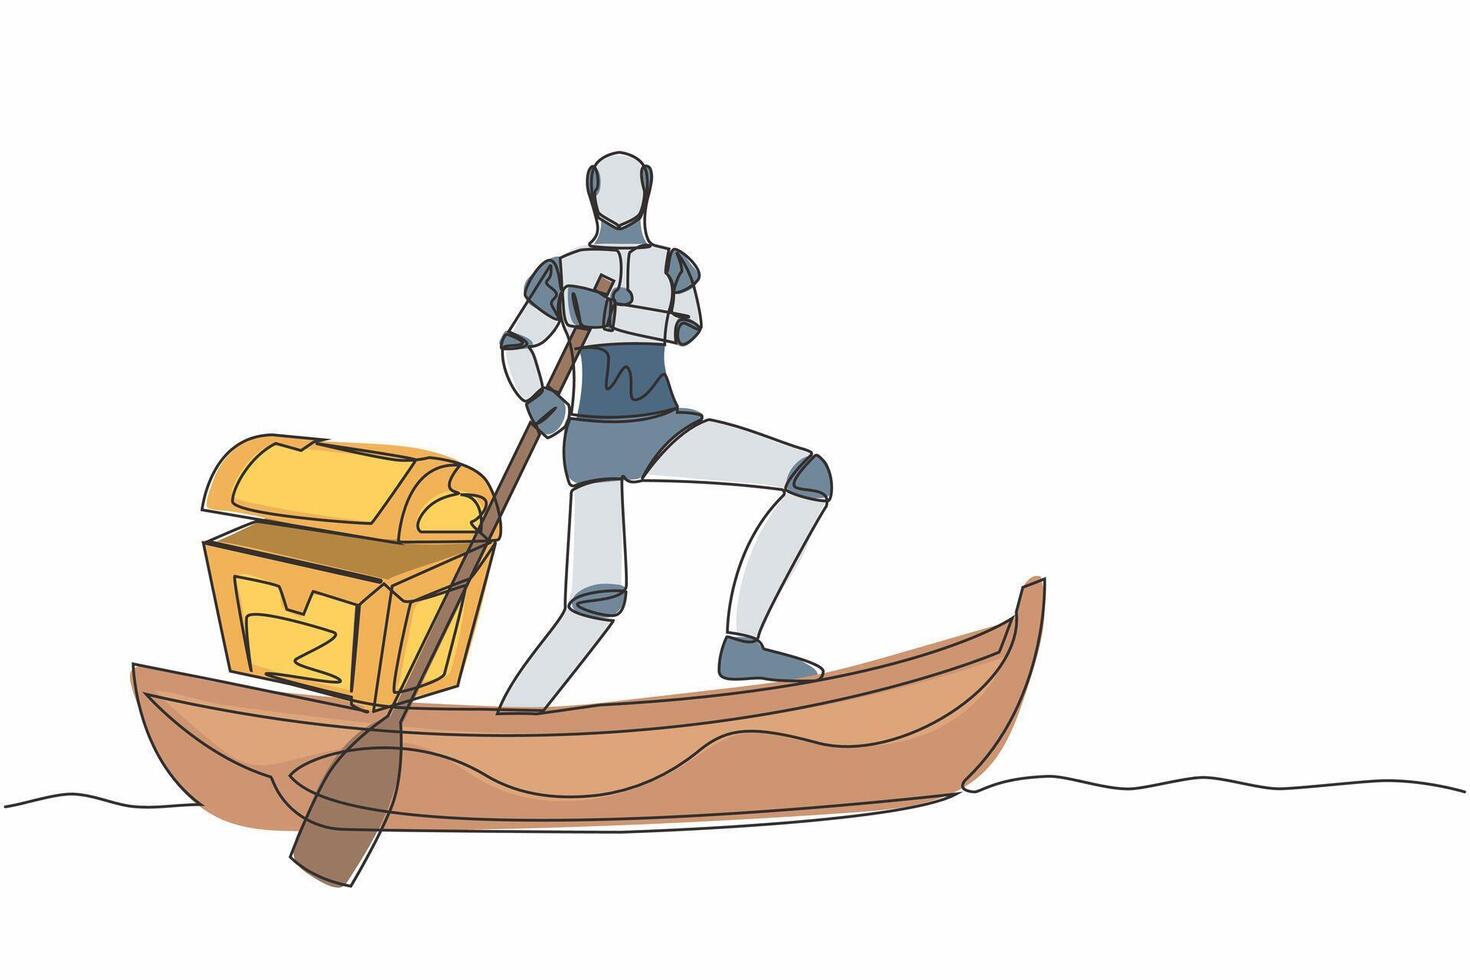 Single continuous line drawing robot sailing away on boat with treasure chest. Money laundering in tech company. Future technology. Artificial intelligence. One line graphic design vector illustration